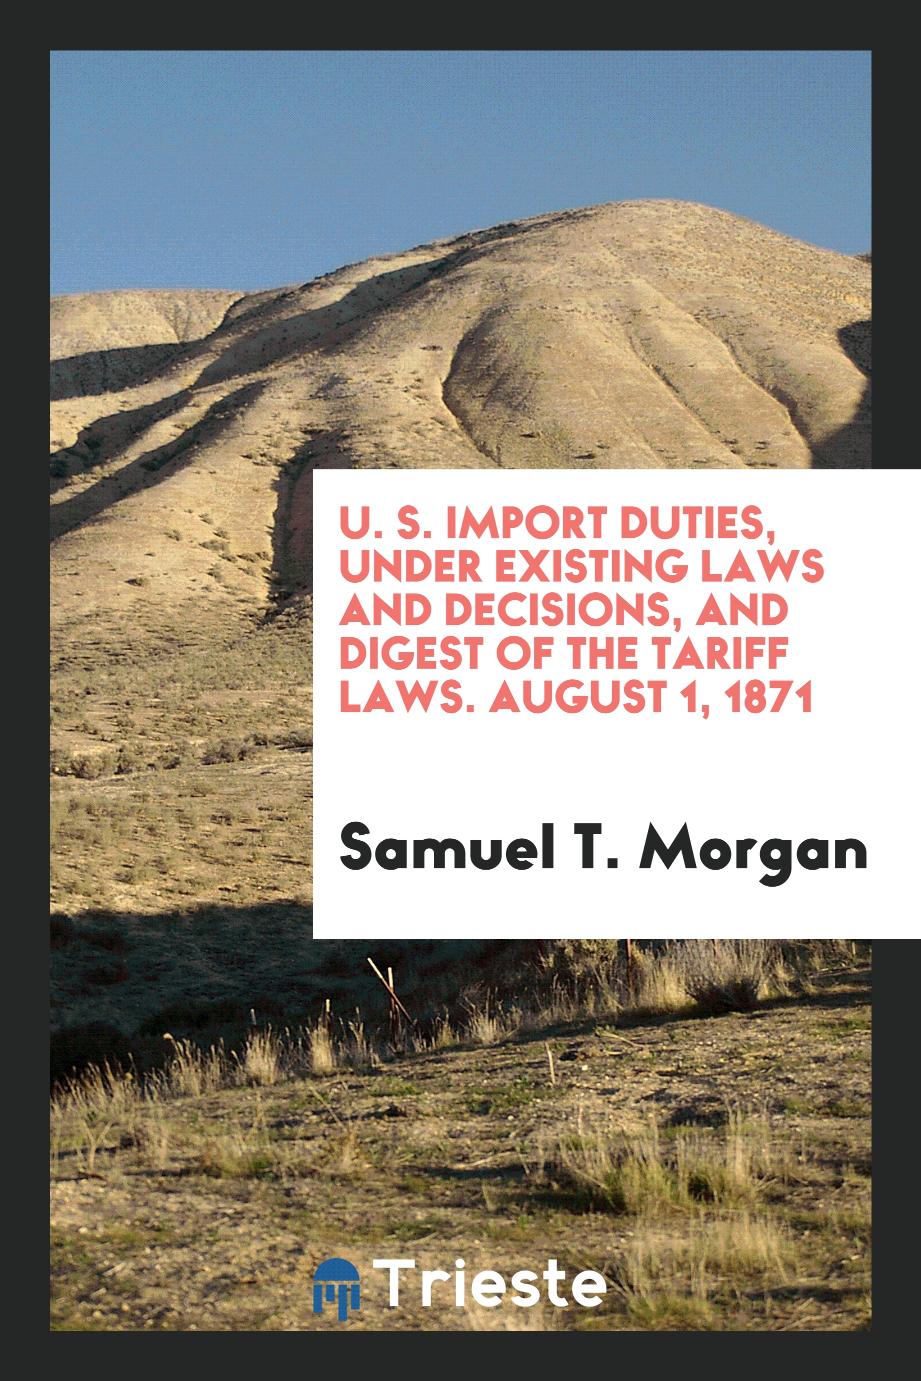 U. S. Import Duties, Under Existing Laws and Decisions, and Digest of the Tariff Laws. August 1, 1871